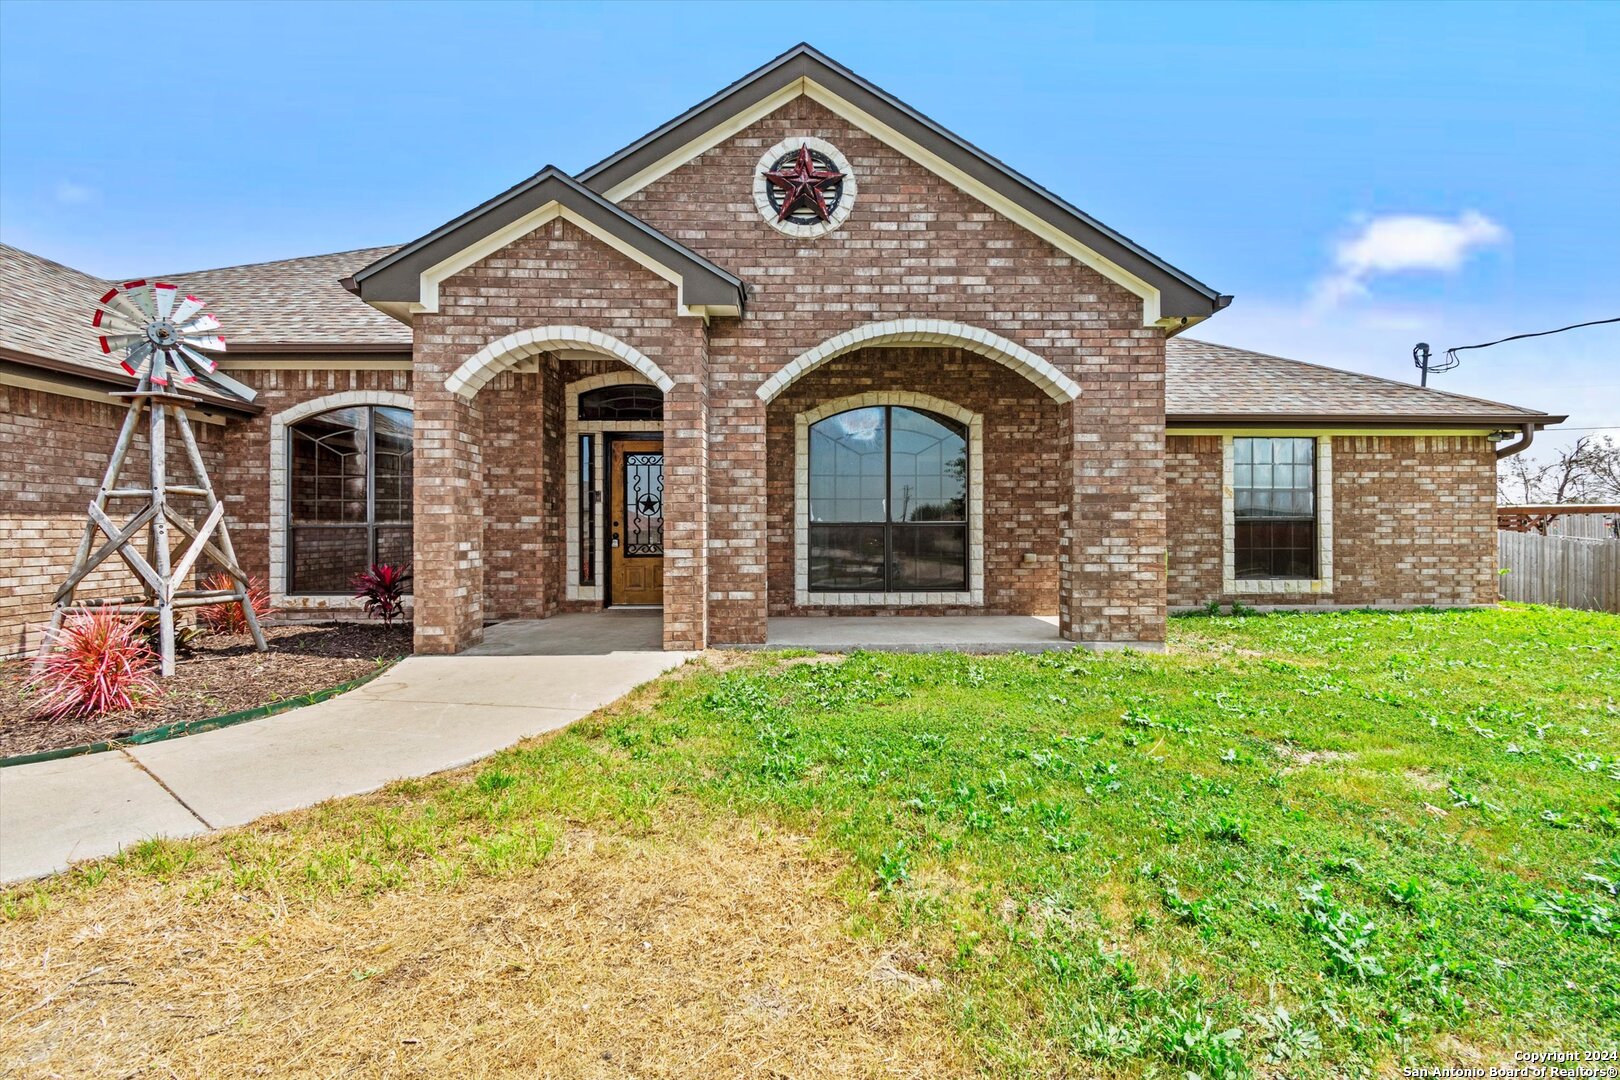 Photo of 1100 Myrtle Dr in Copperas Cove, TX